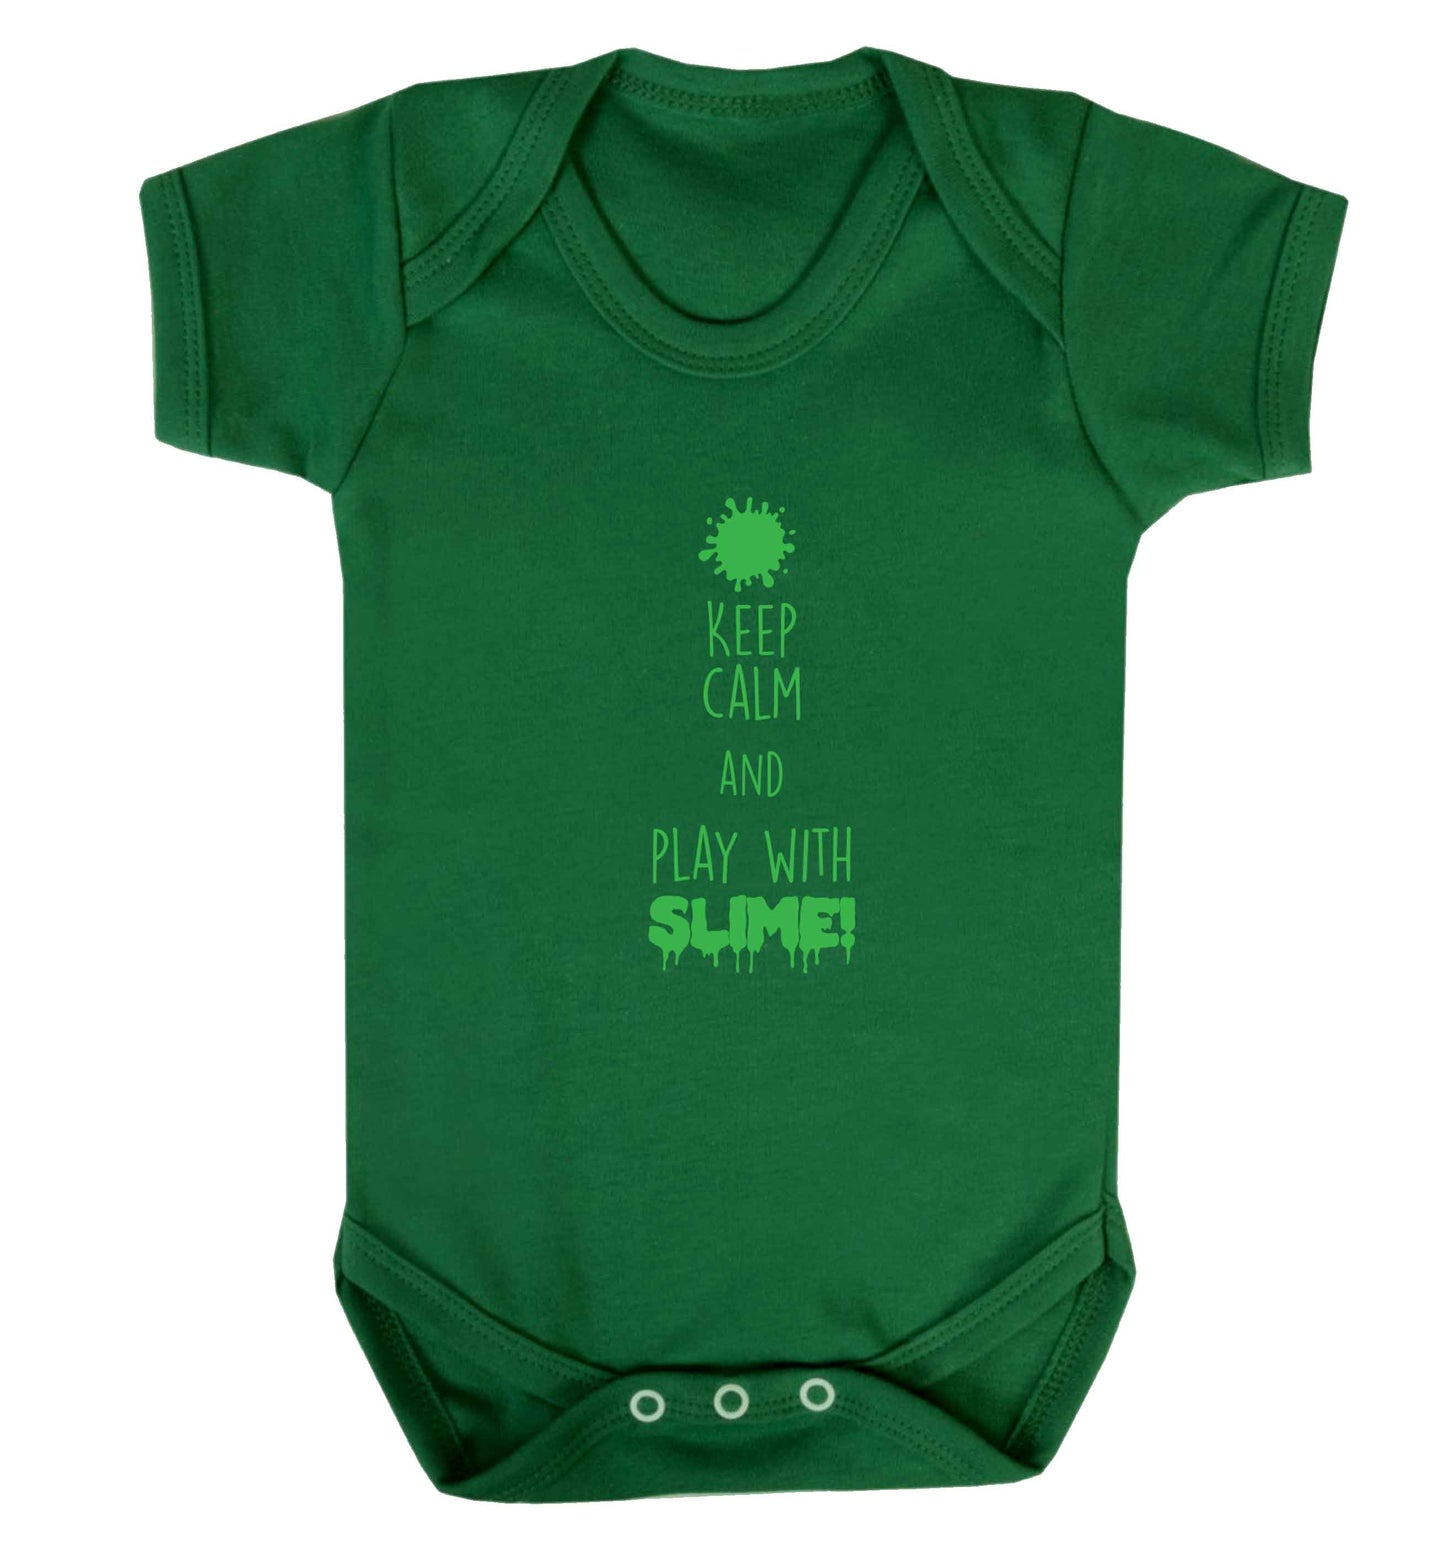 Neon green keep calm and play with slime!baby vest green 18-24 months